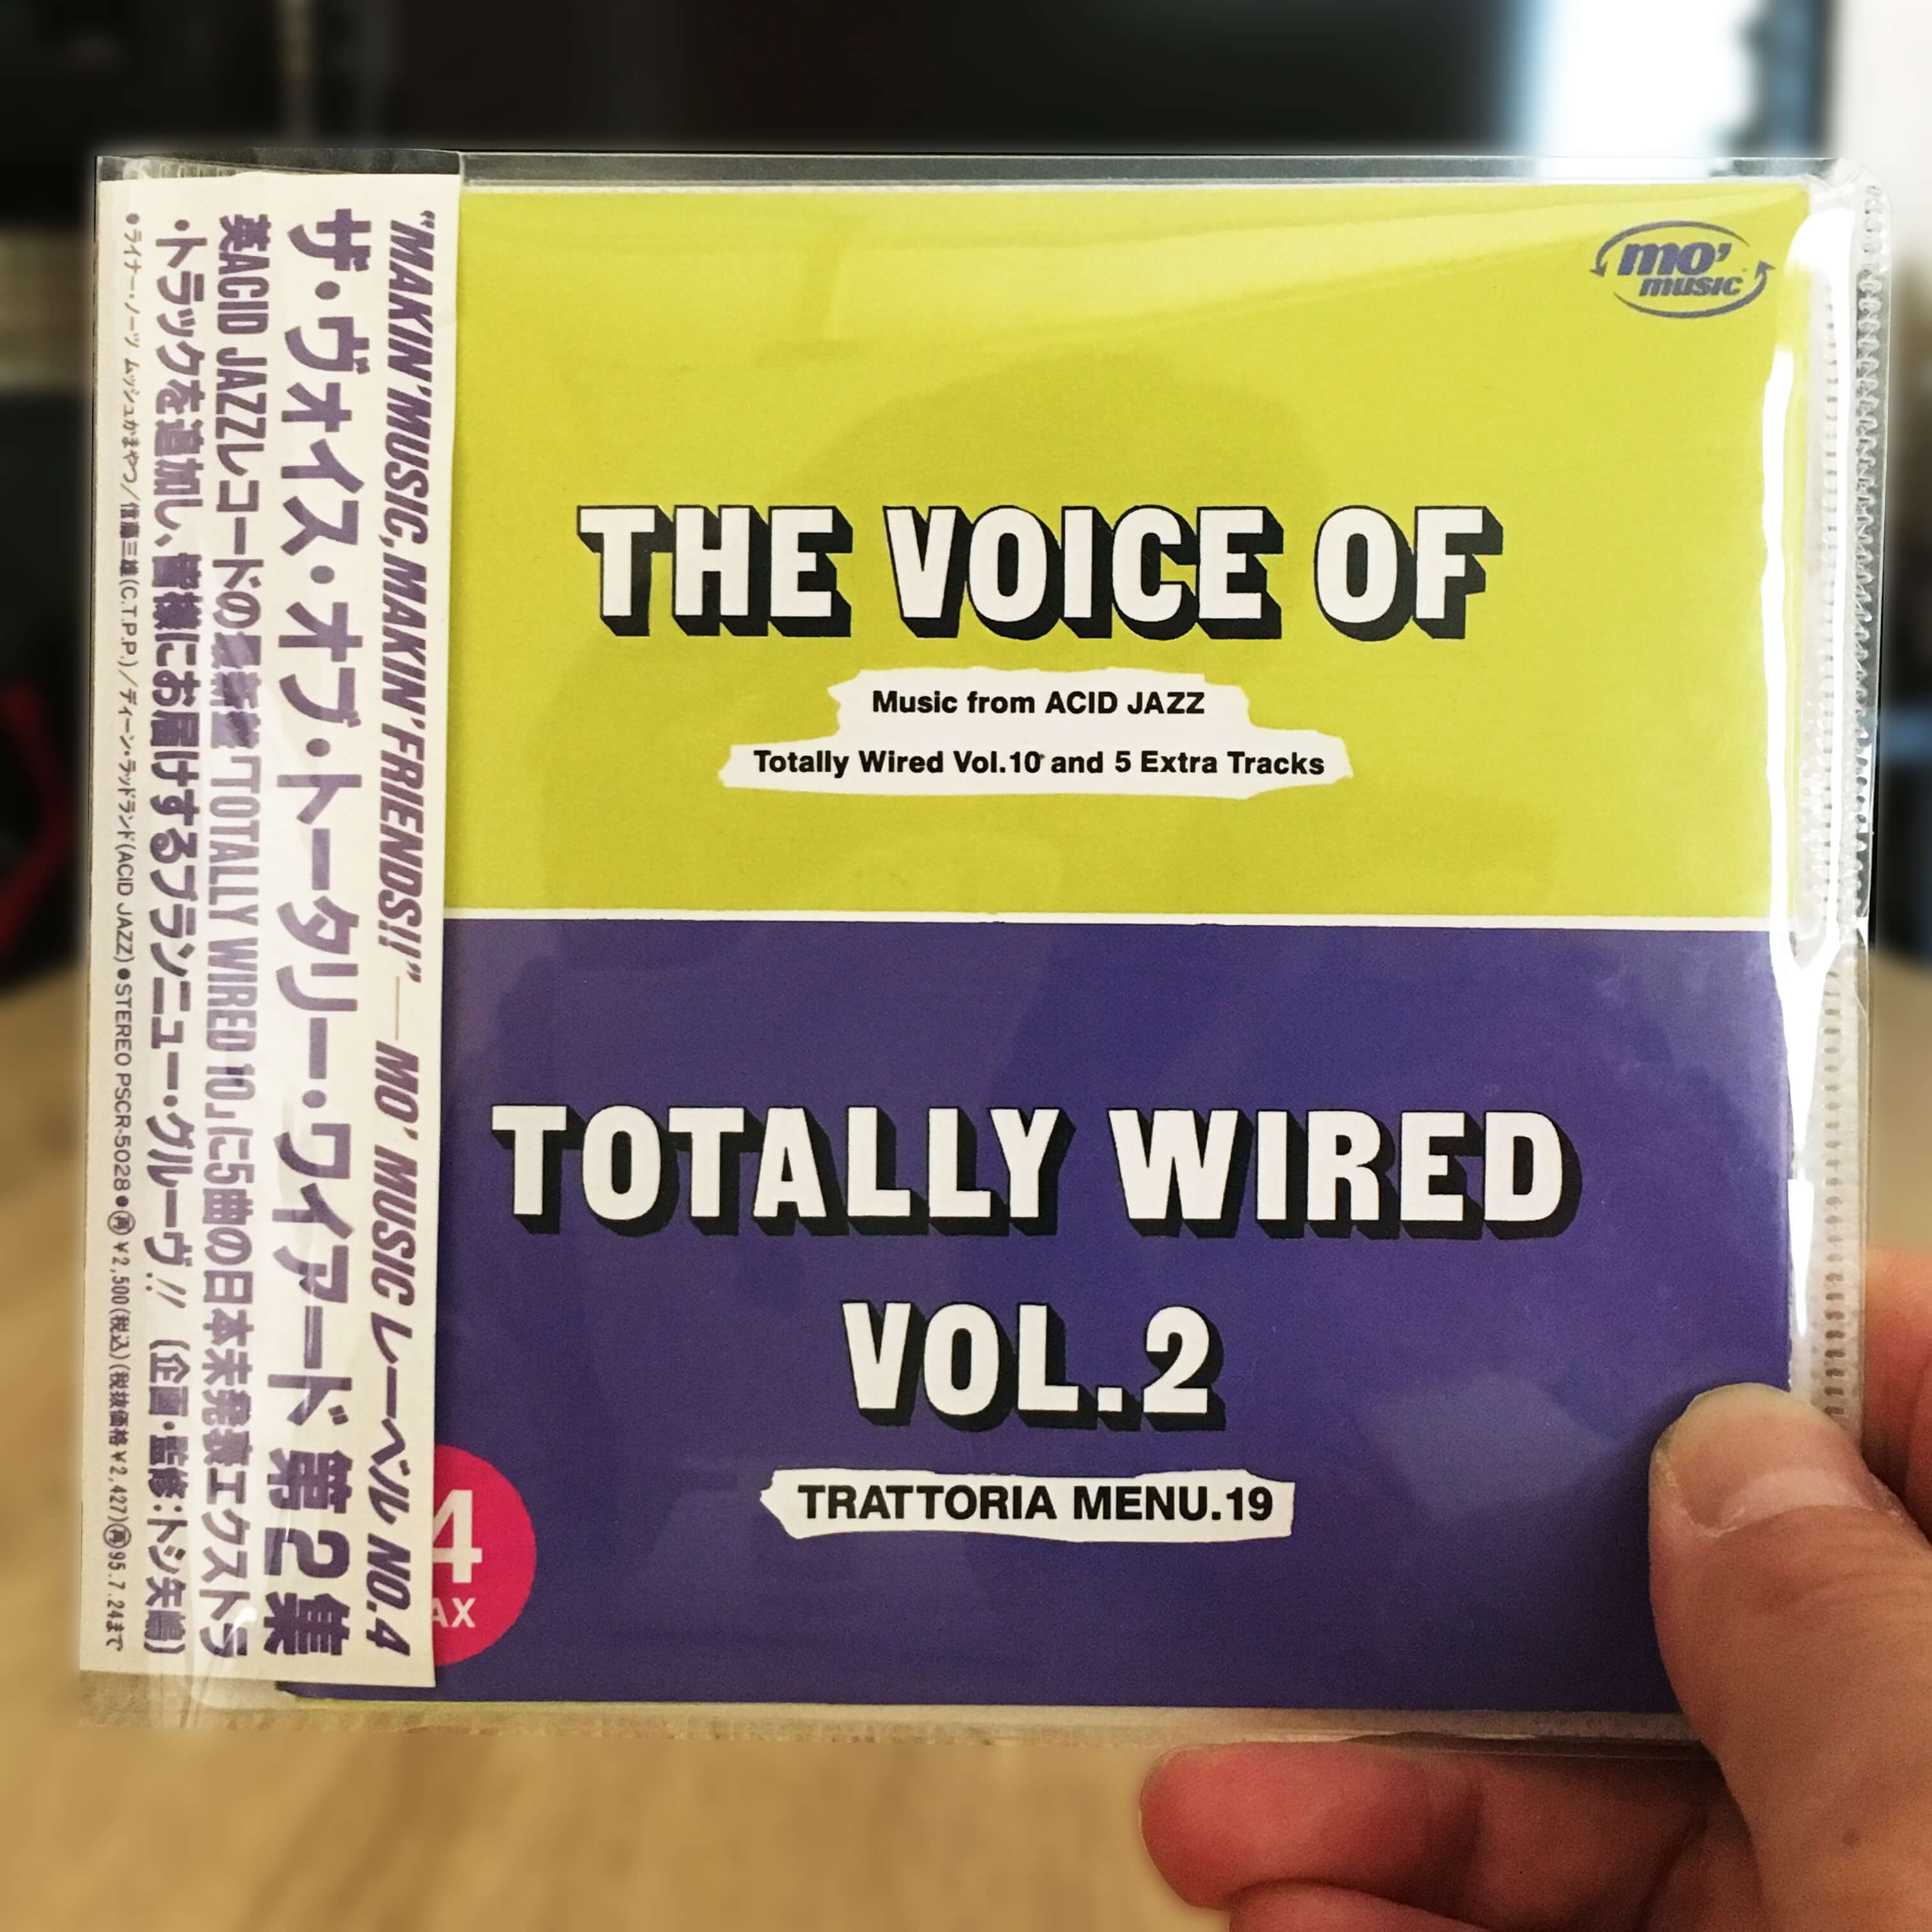 THE VOICE OF TOTALLY WIRED Vol.2